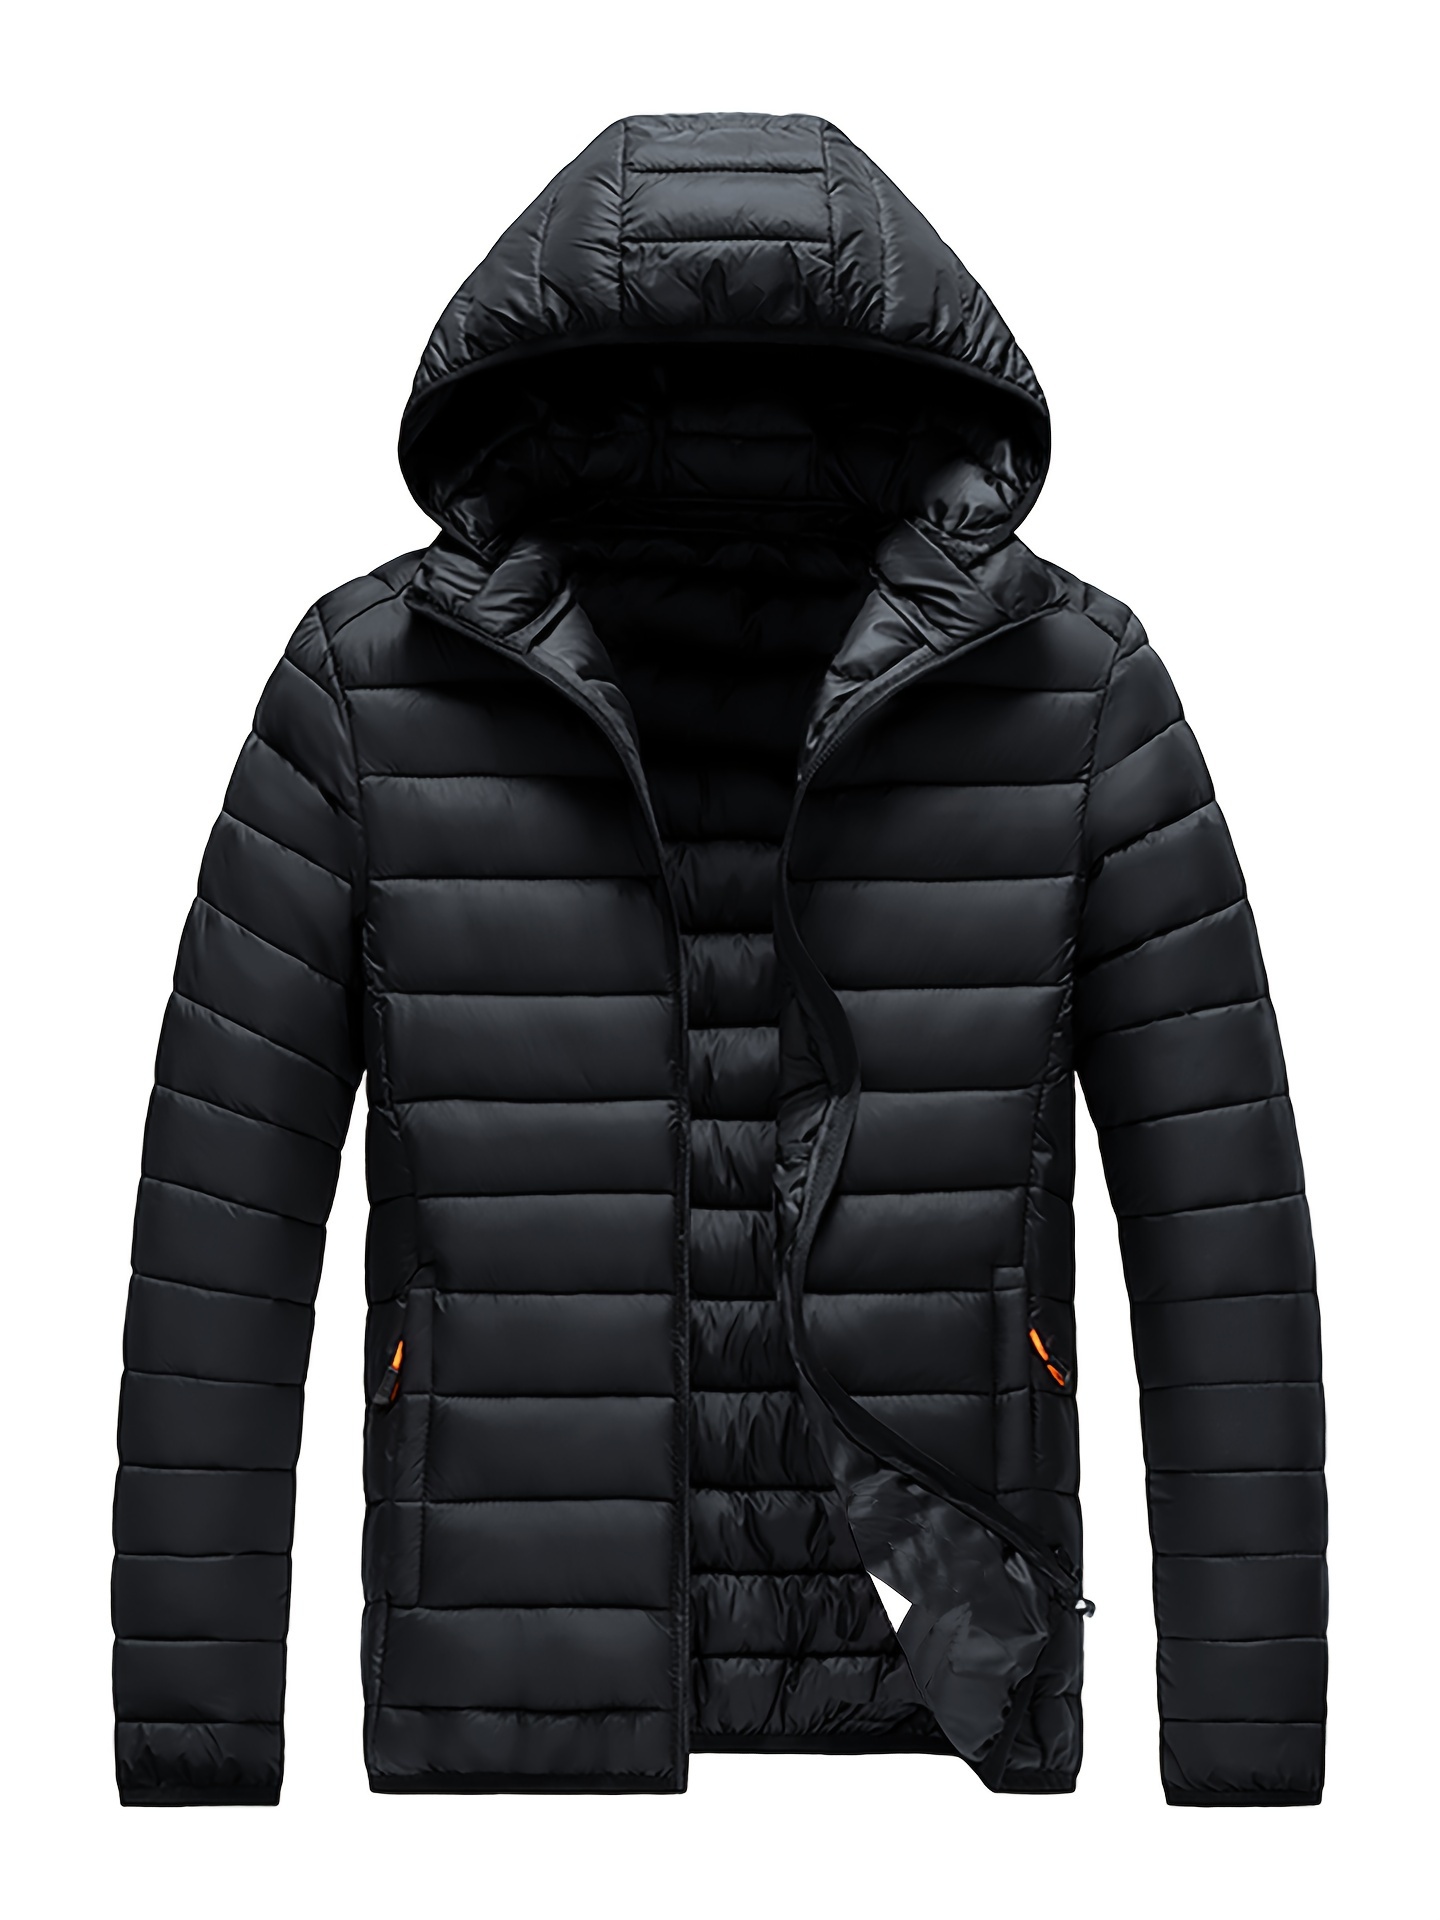 trapstar coat Hooded Winter New Down Jacket American High Street Thick  Thermal Jacket 187